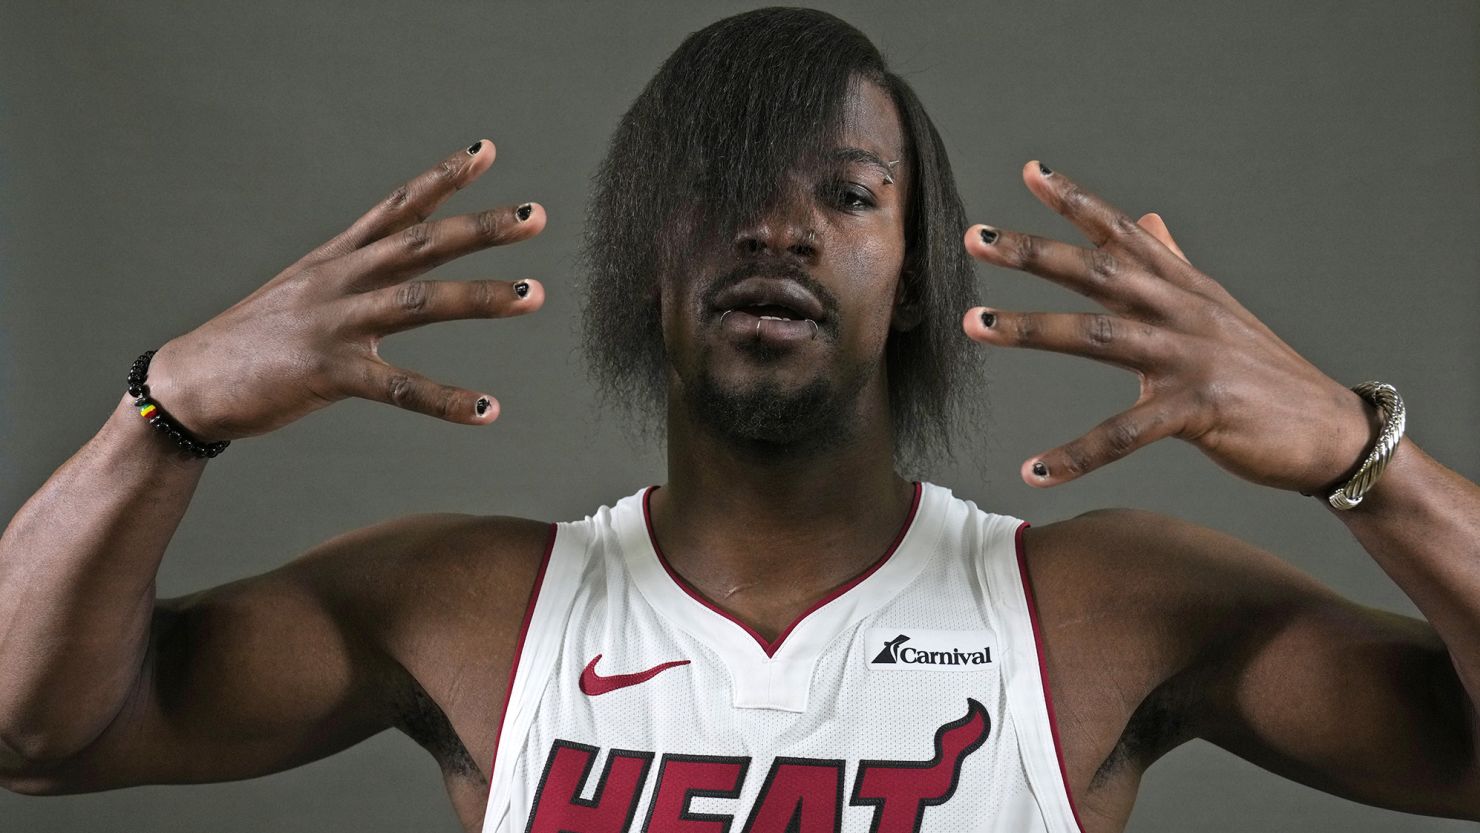 Miami Heat Forward Jimmy Butler poses for a photo during the NBA basketball team's media day, Monday, Oct. 2, 2023, in Miami. Butler had a new look for Media Day and the NBA world immediately took notice. (AP Photo/Wilfredo Lee)